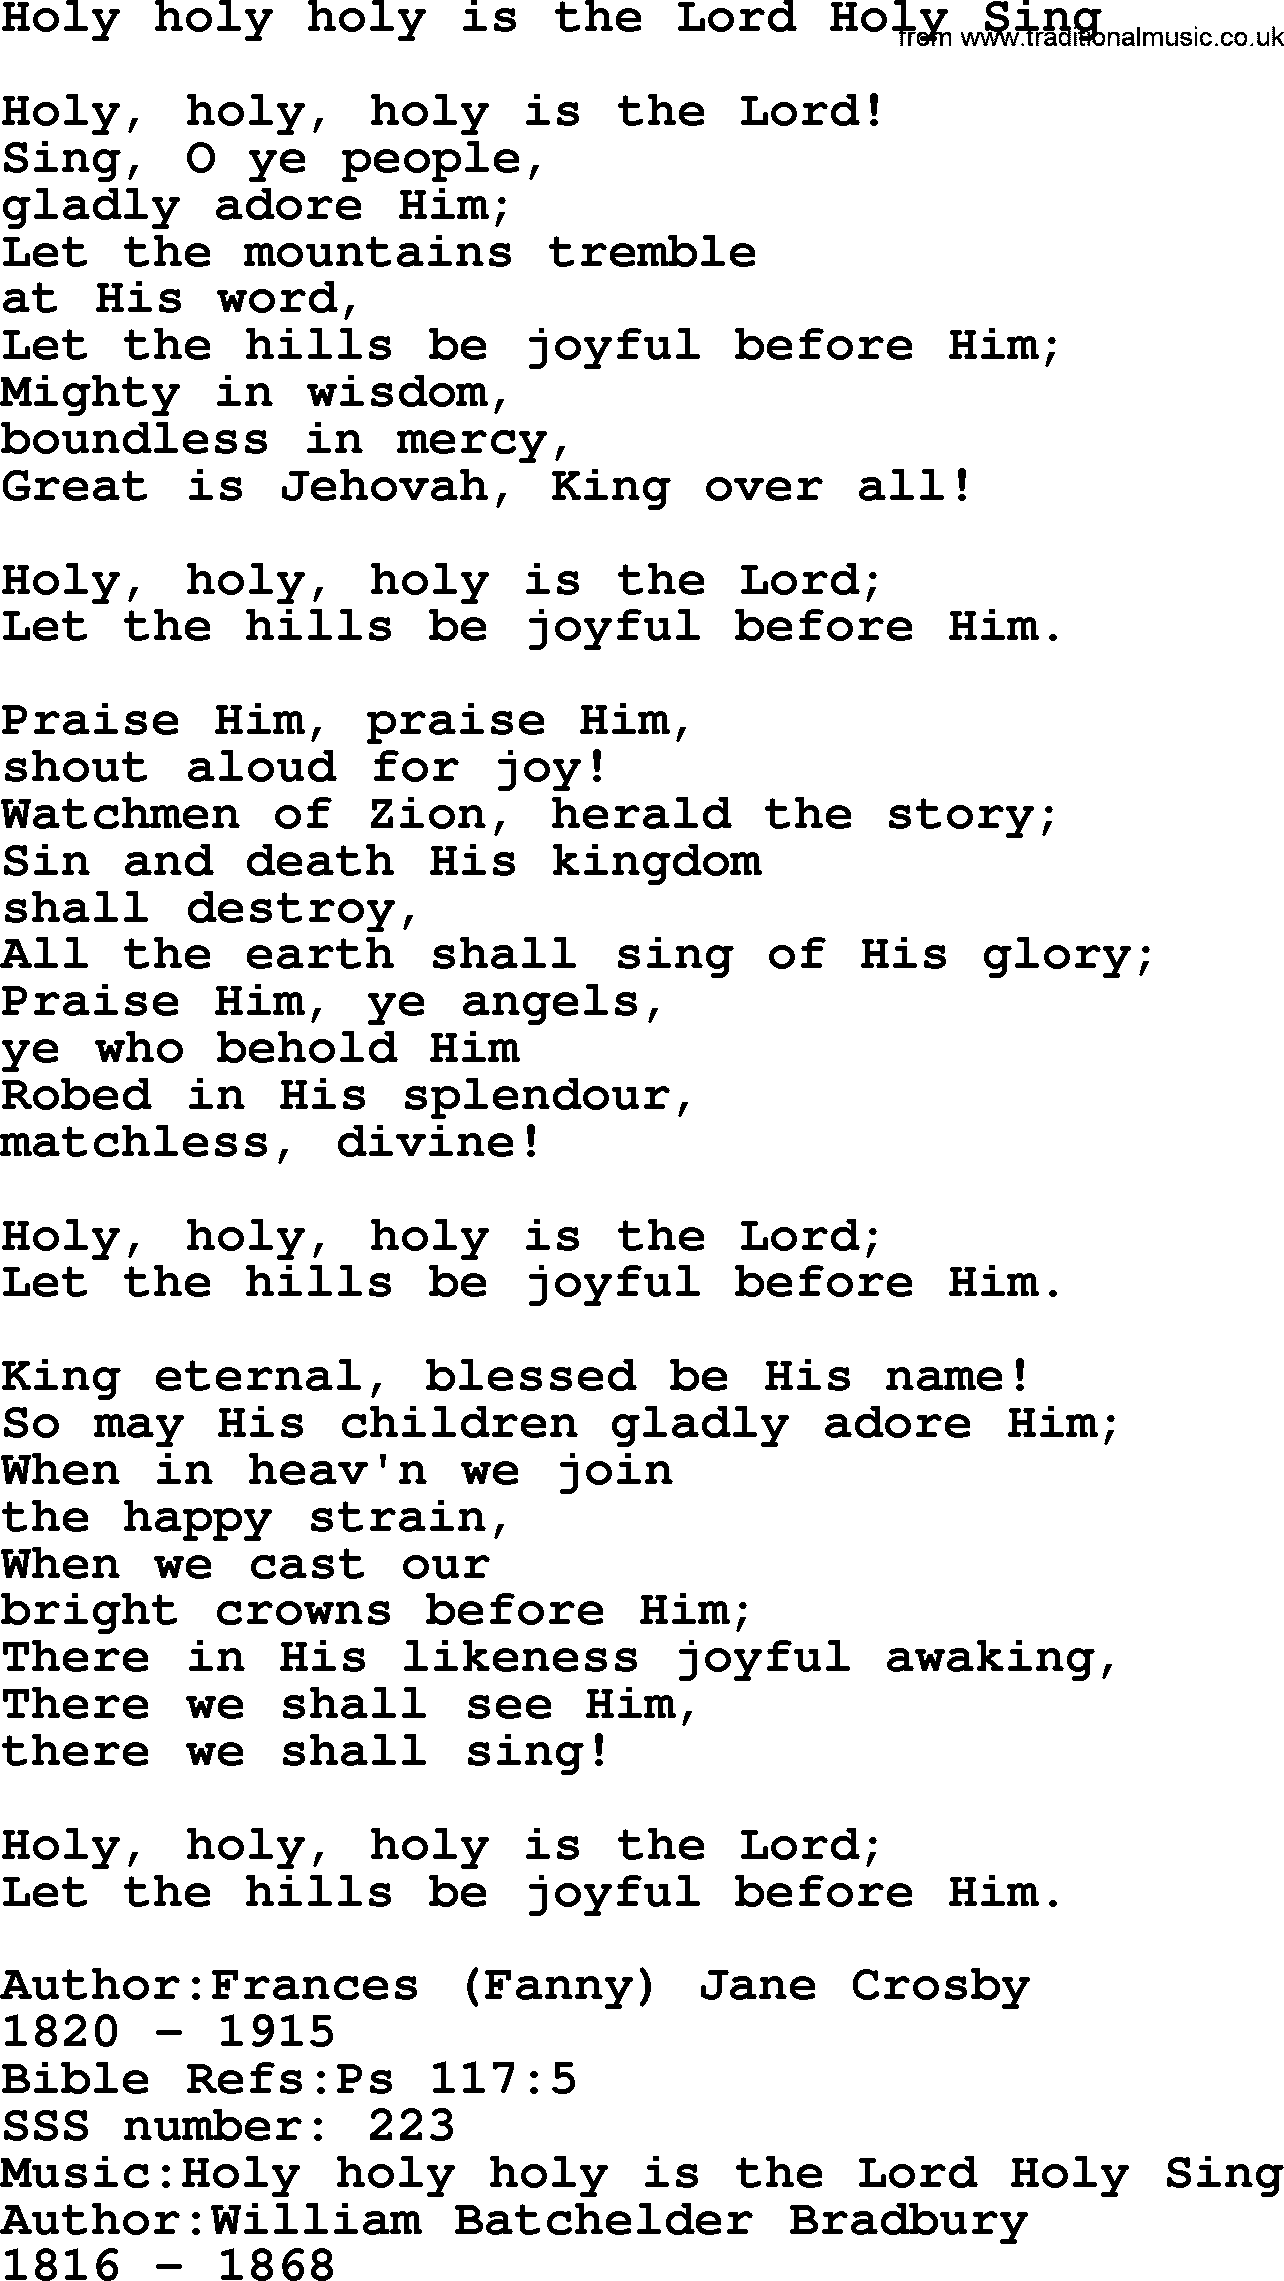 Sacred Songs and Solos complete, 1200 Hymns, title: Holy Holy Holy Is The Lord Holy Sing, lyrics and PDF